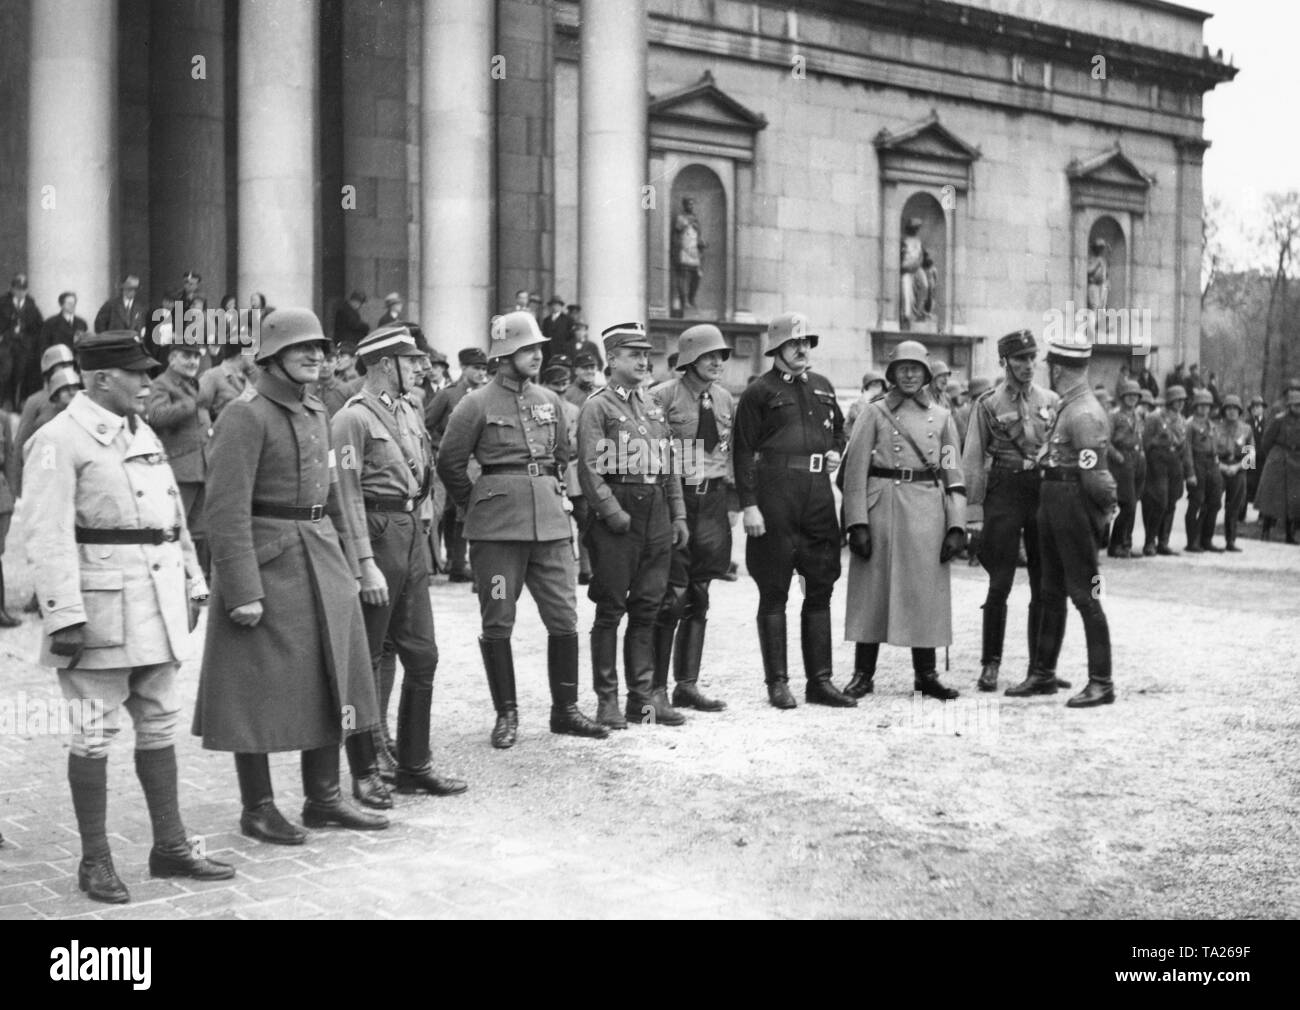 The leaders of the Freikorps, who were actively involved in the Beer Hall  Putsch (Hitler putsch) of 1923 gather on the Munich Koenigsplatz on the  10th anniversary of the coup. The flags